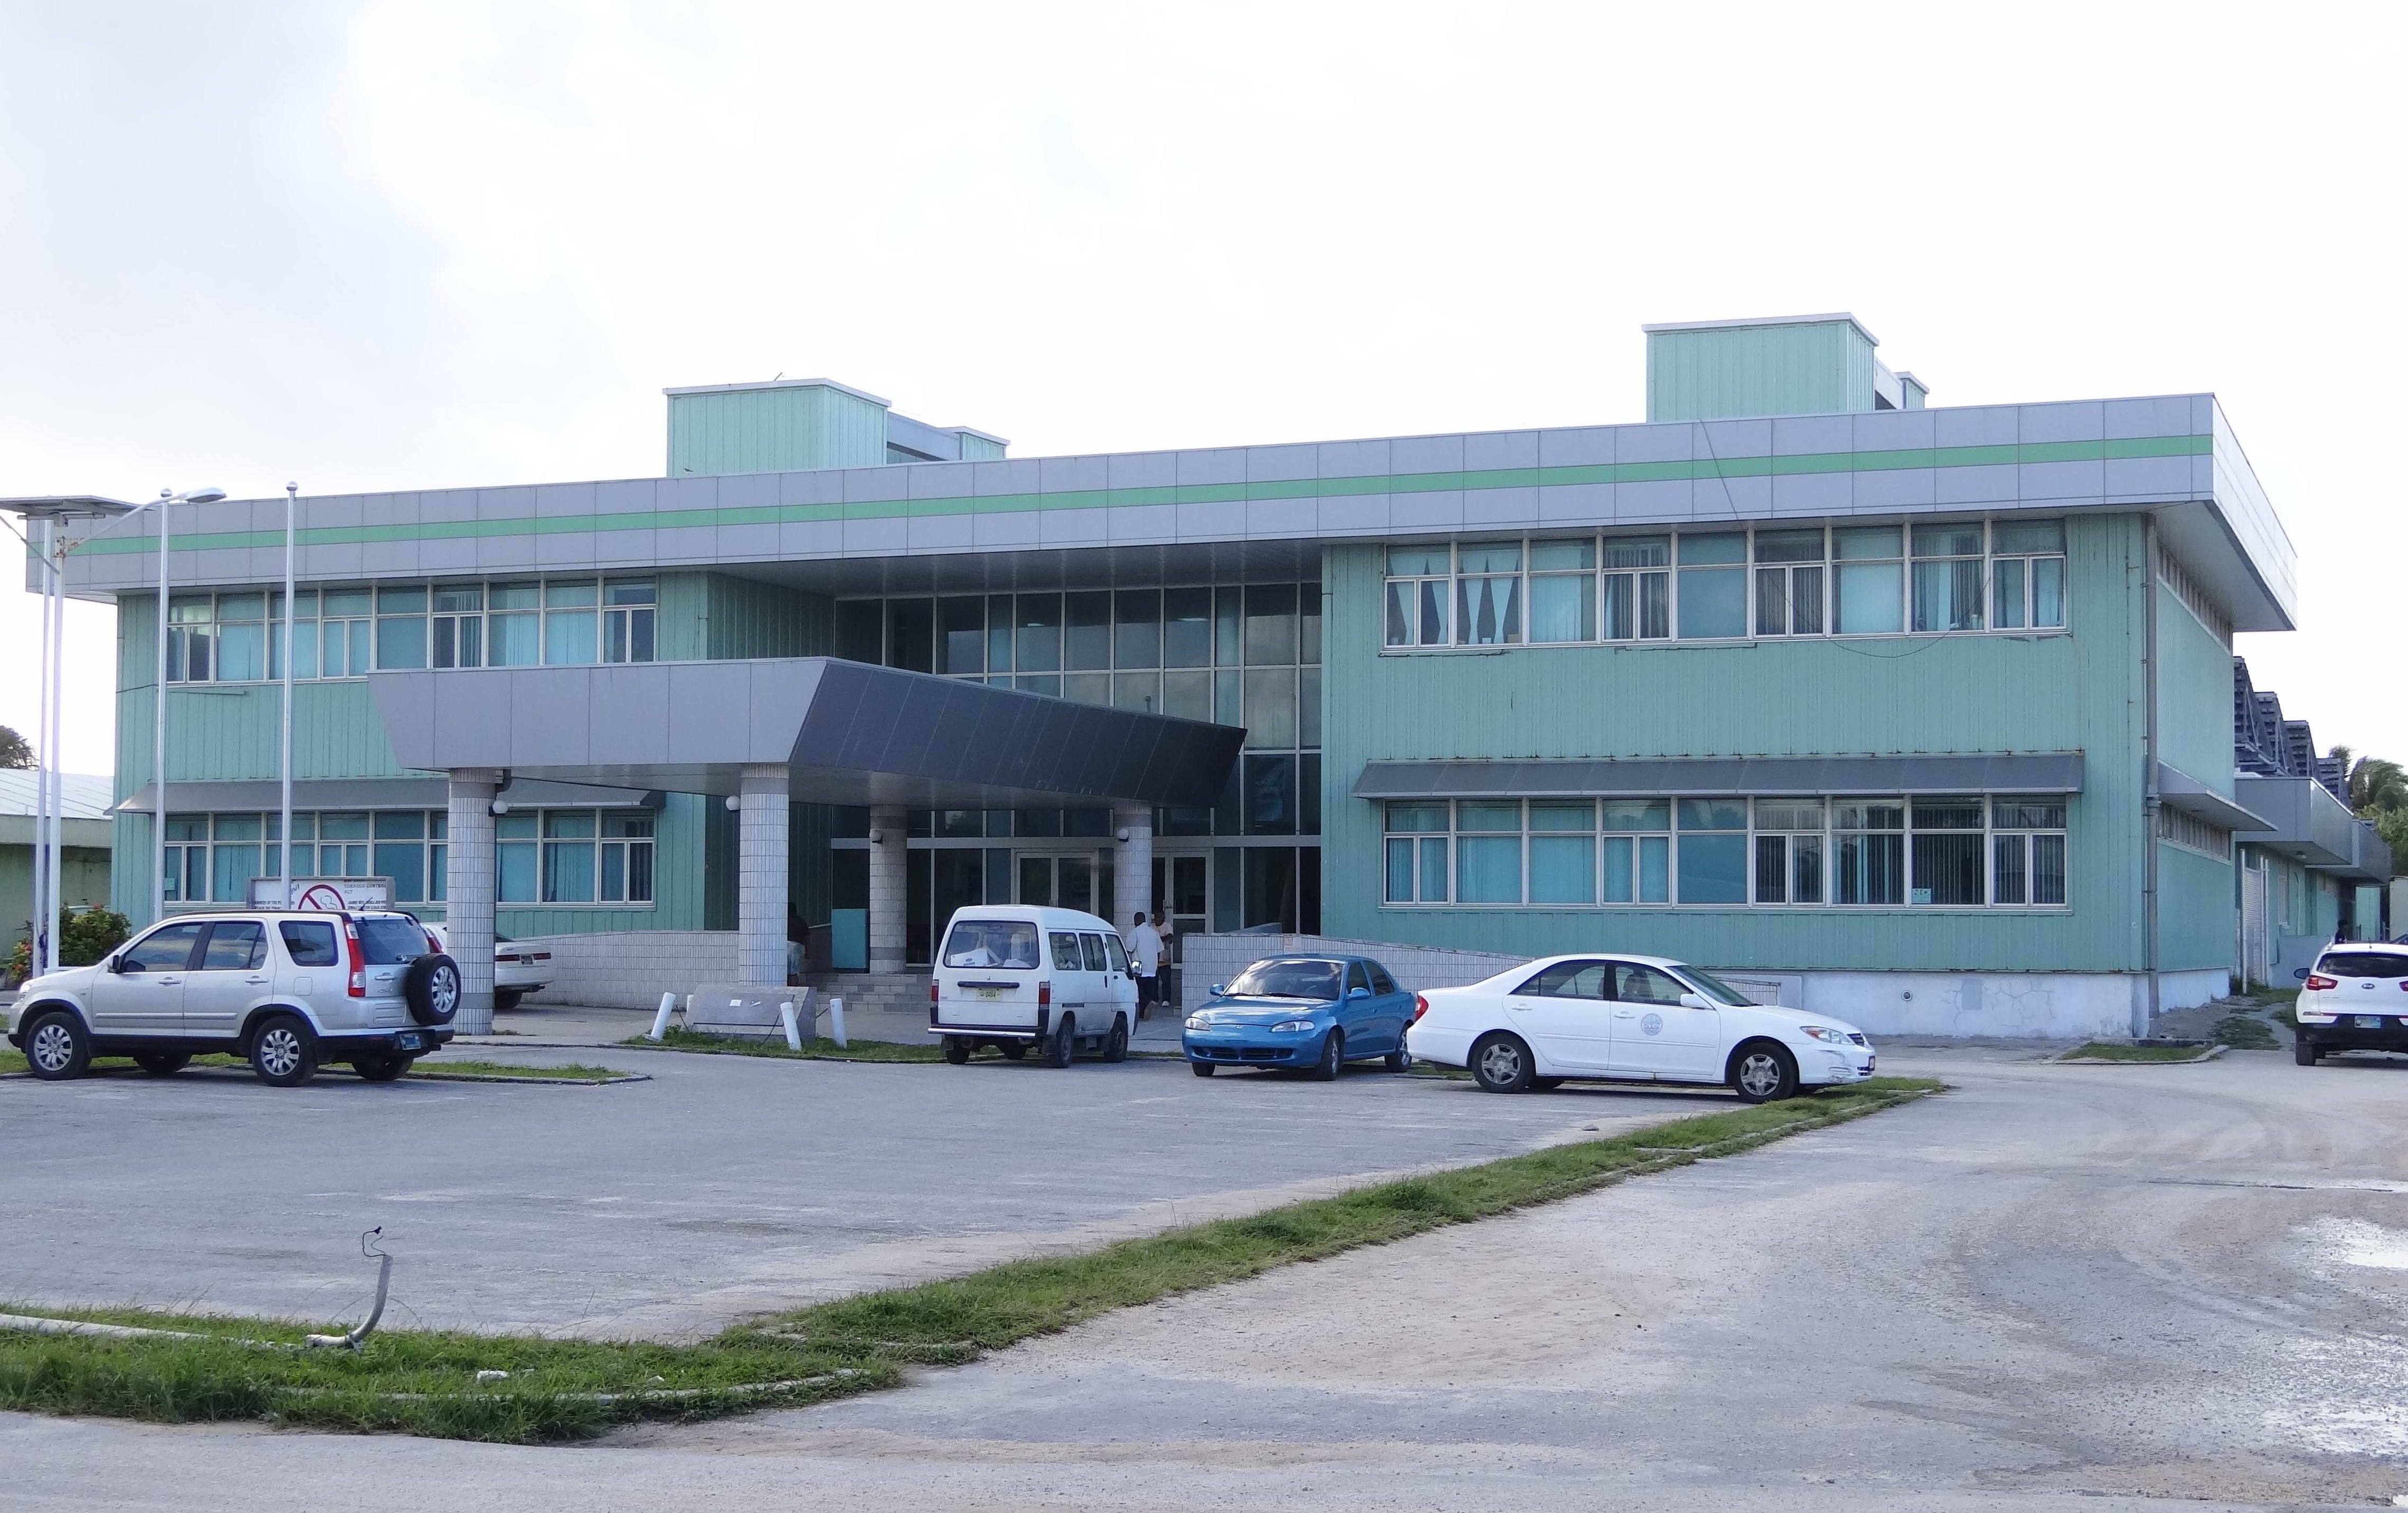 Majuro hospital, pictured, has been overflowing with patients suffering from dengue fever for the past two months.